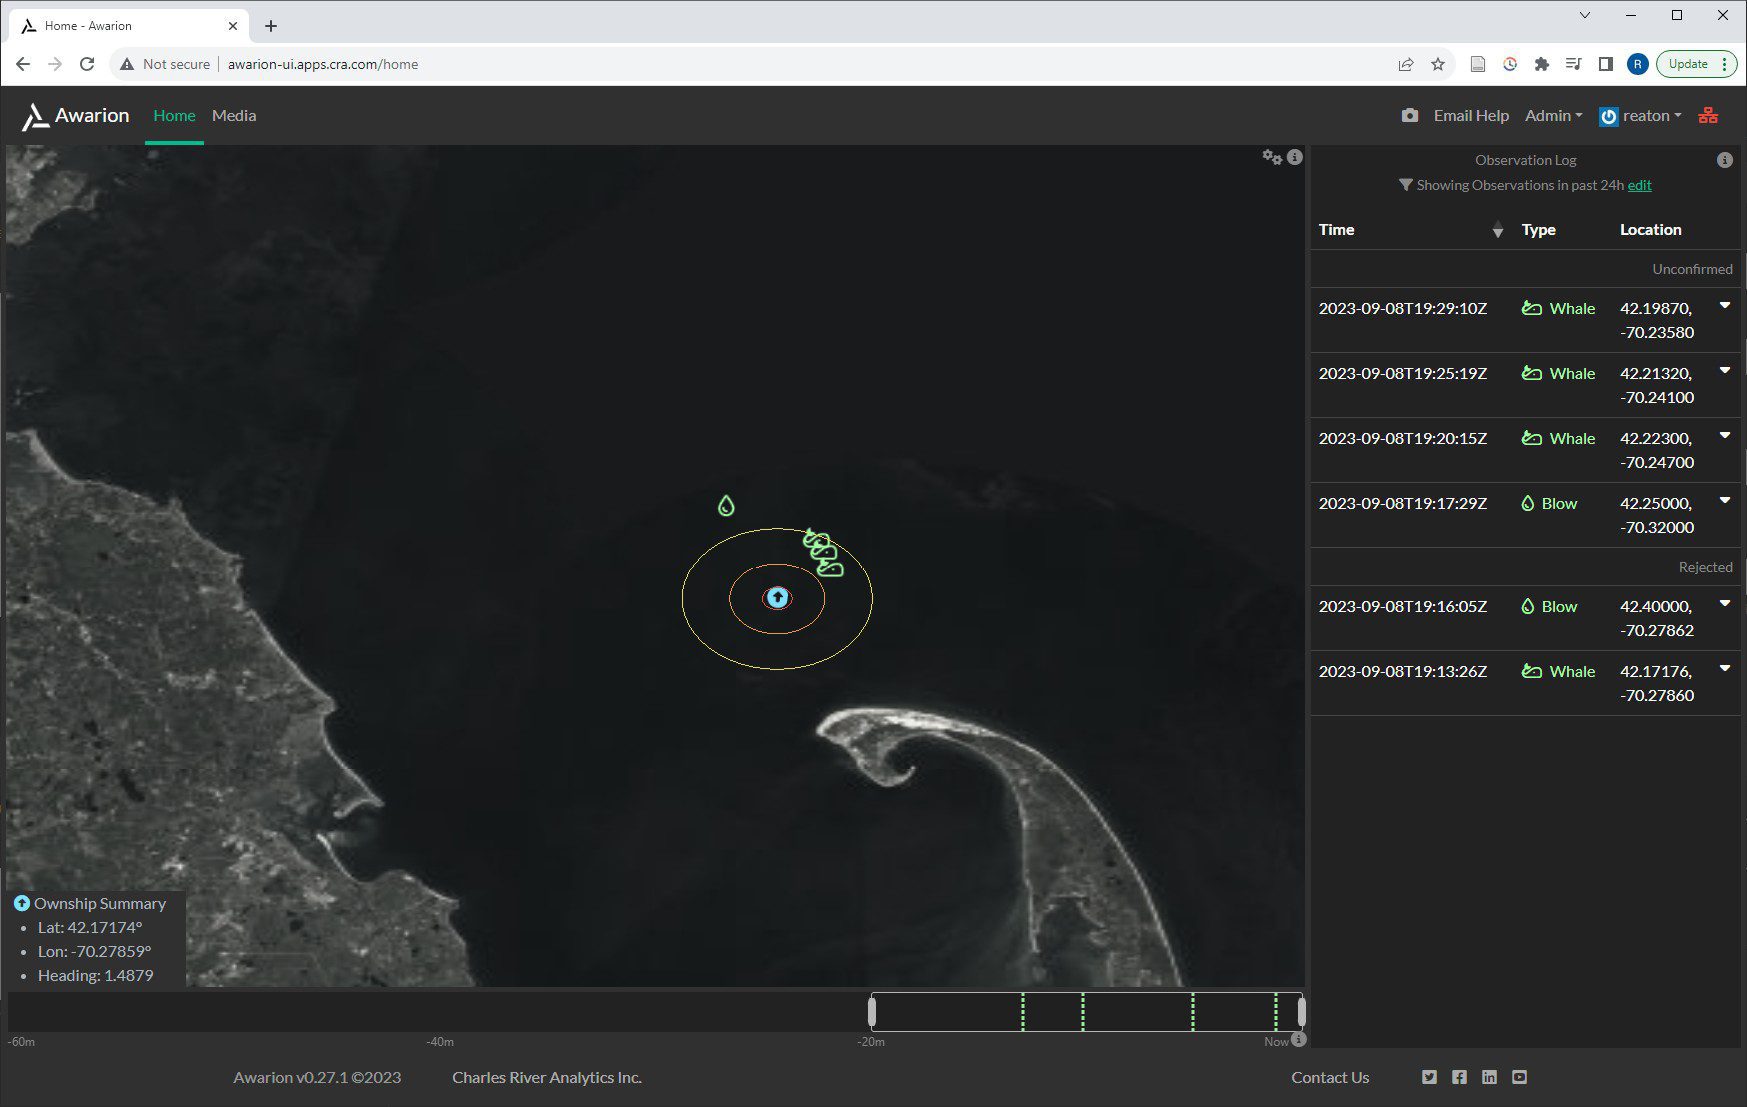 Screen shot of Awarion Software showing whale and blow detection off the coast of Cape Cod.